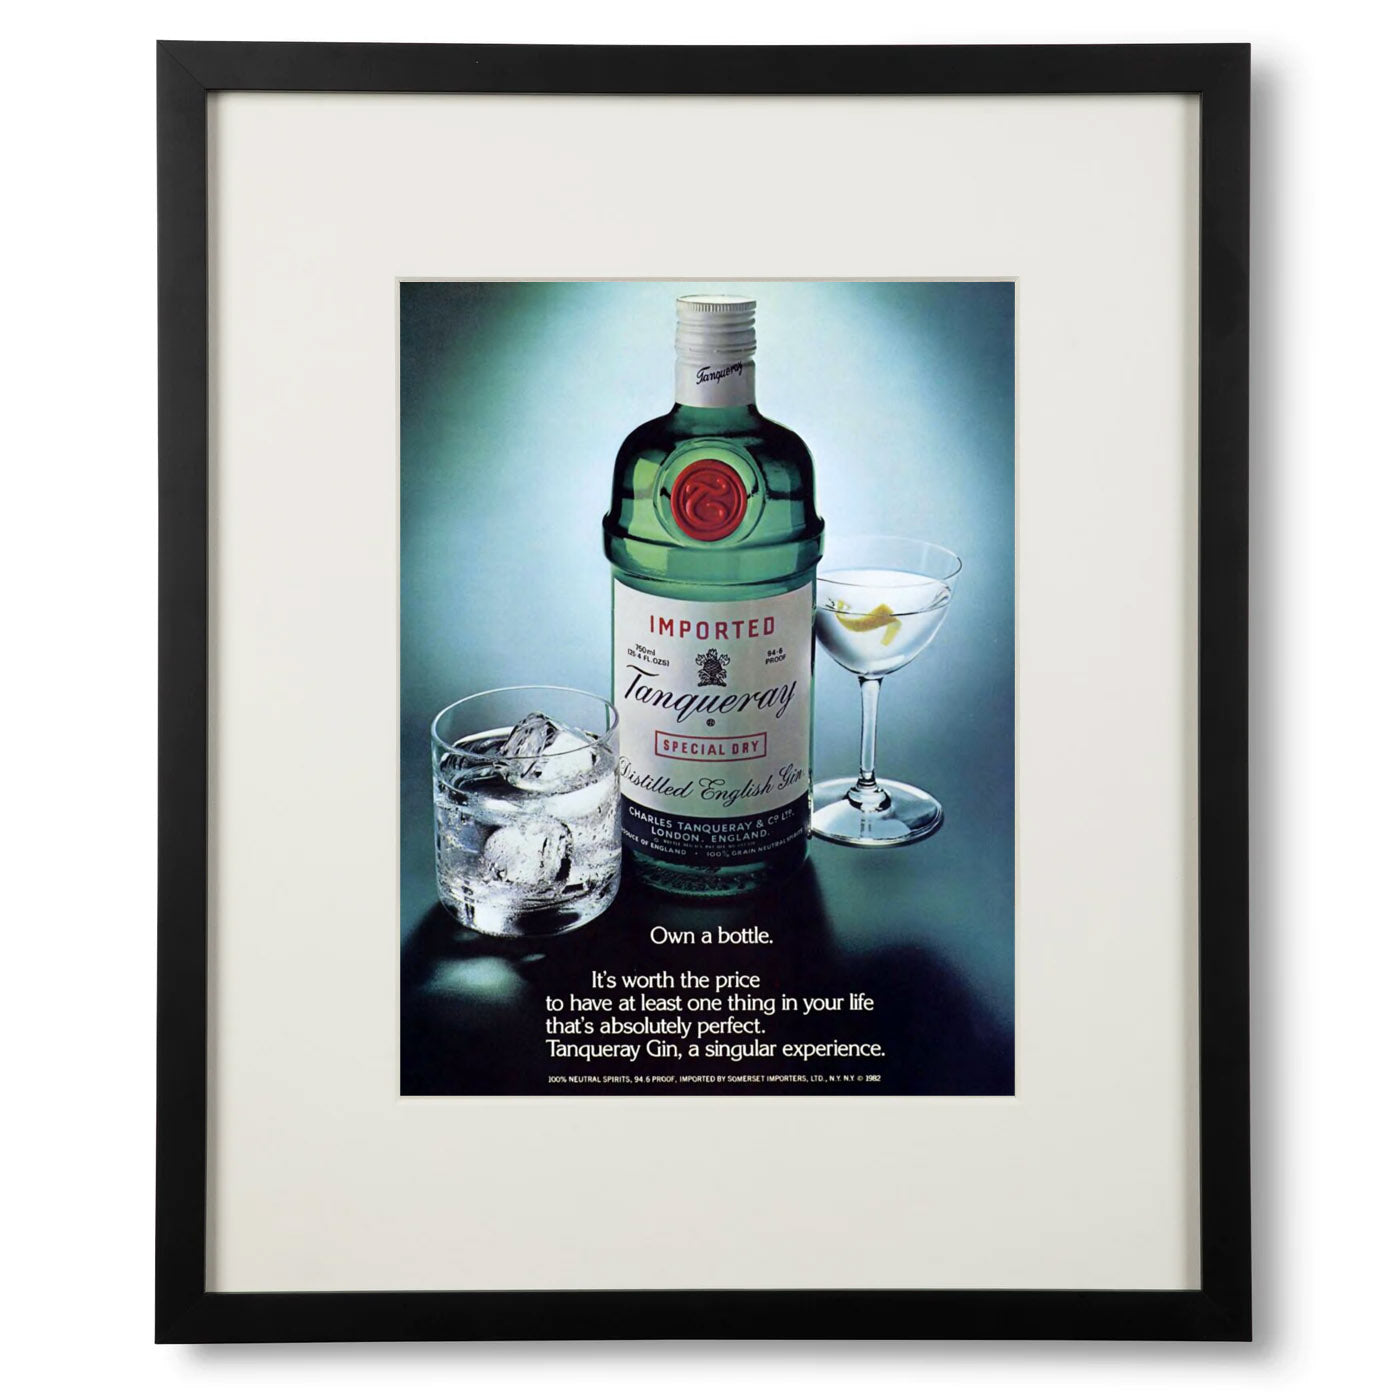 Framed Tanqueray Gin Own A Bottle Ad